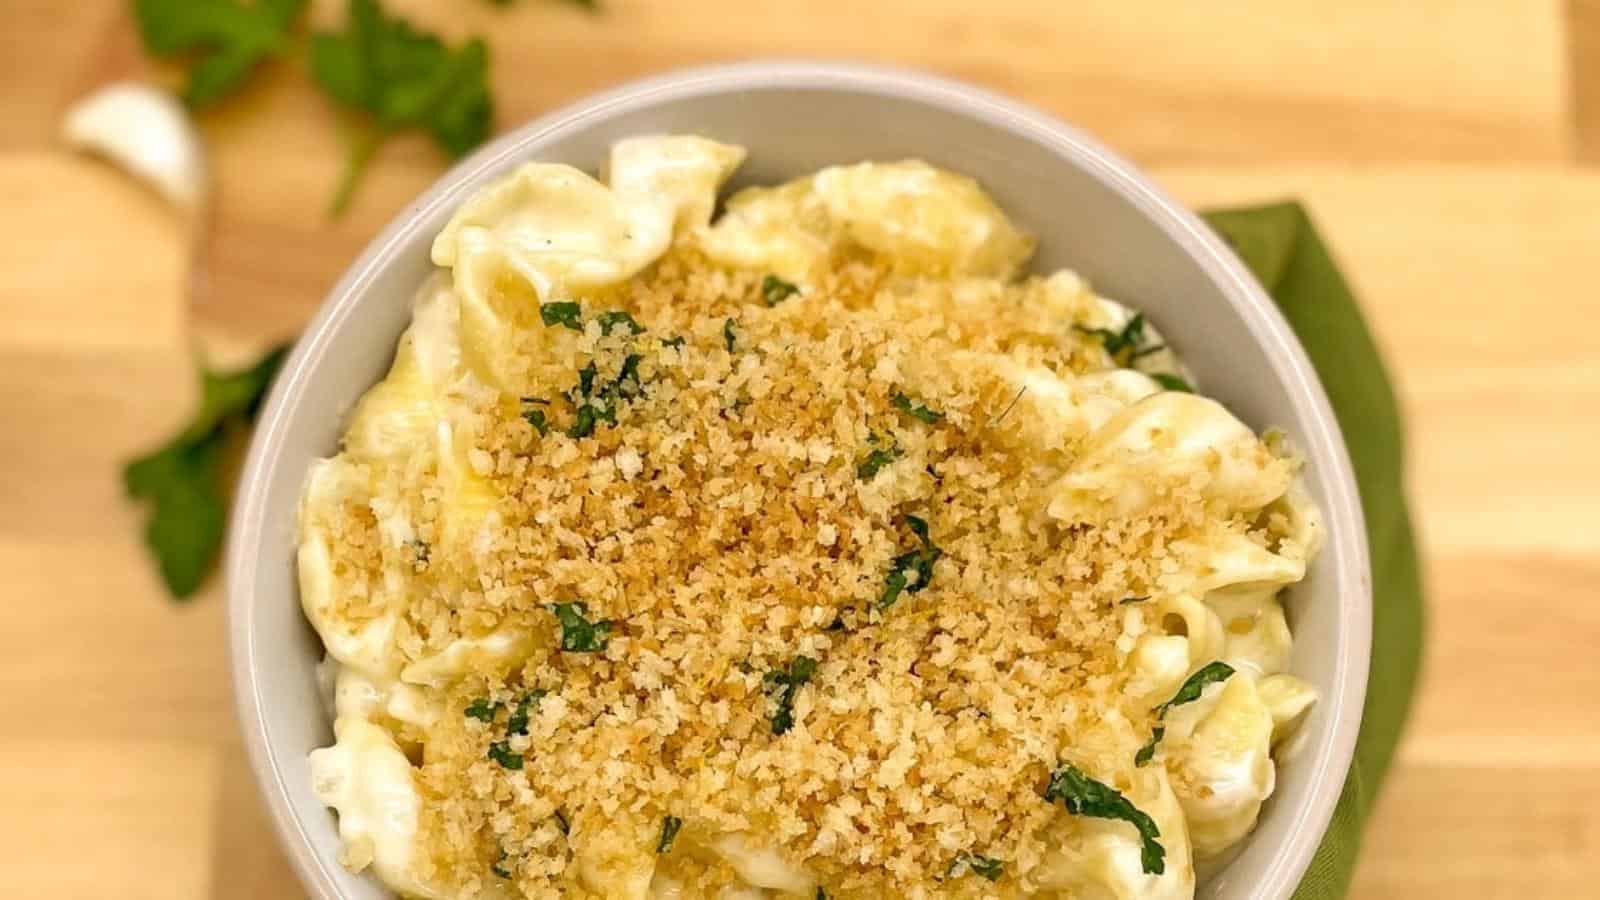 Close up of macaroni and cheese with a breadcrumb and parsley topping in a white bowl with a green linen on a wood cutting board.